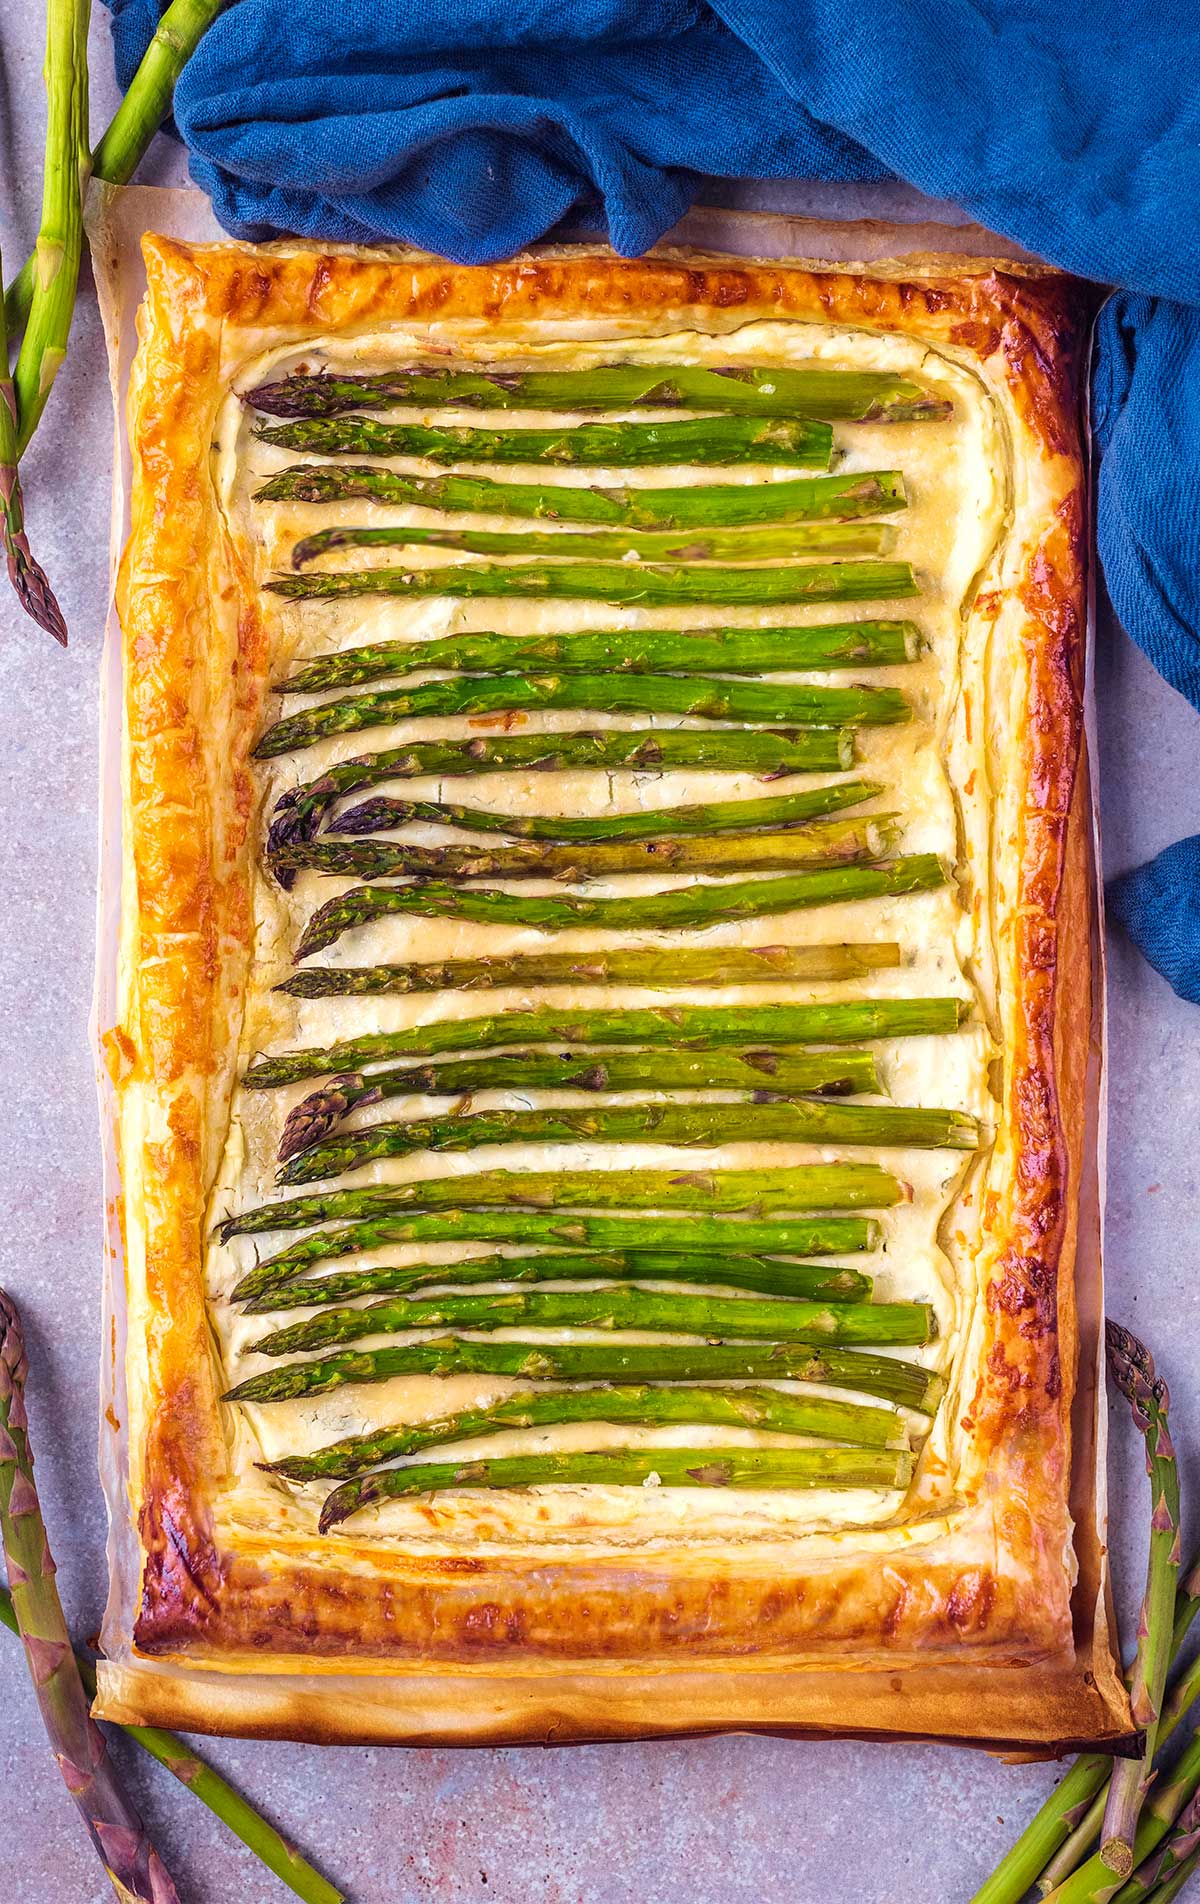 A whole puff pastry tart filled with asparagus spears.